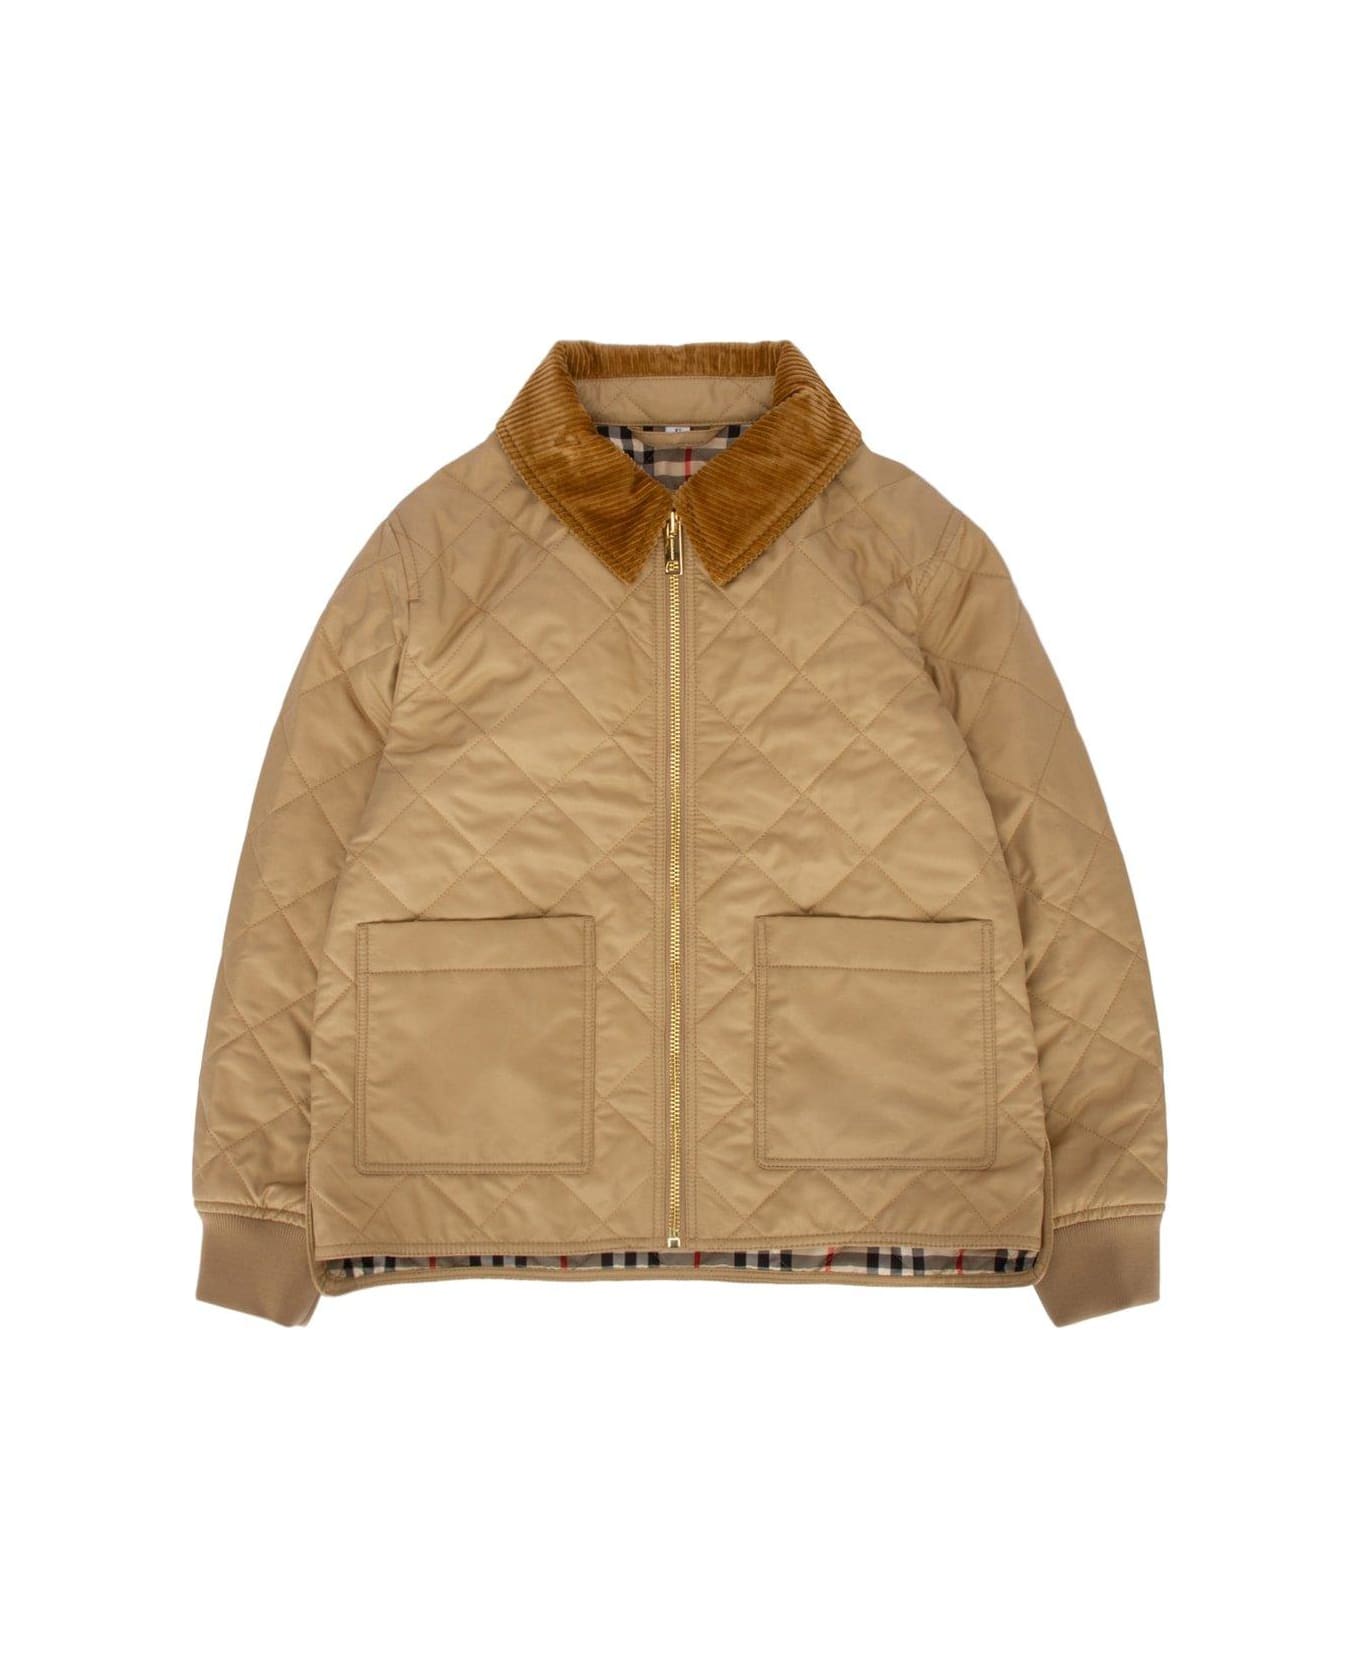 Burberry Quilted Zipped Jacket - Archive beige コート＆ジャケット